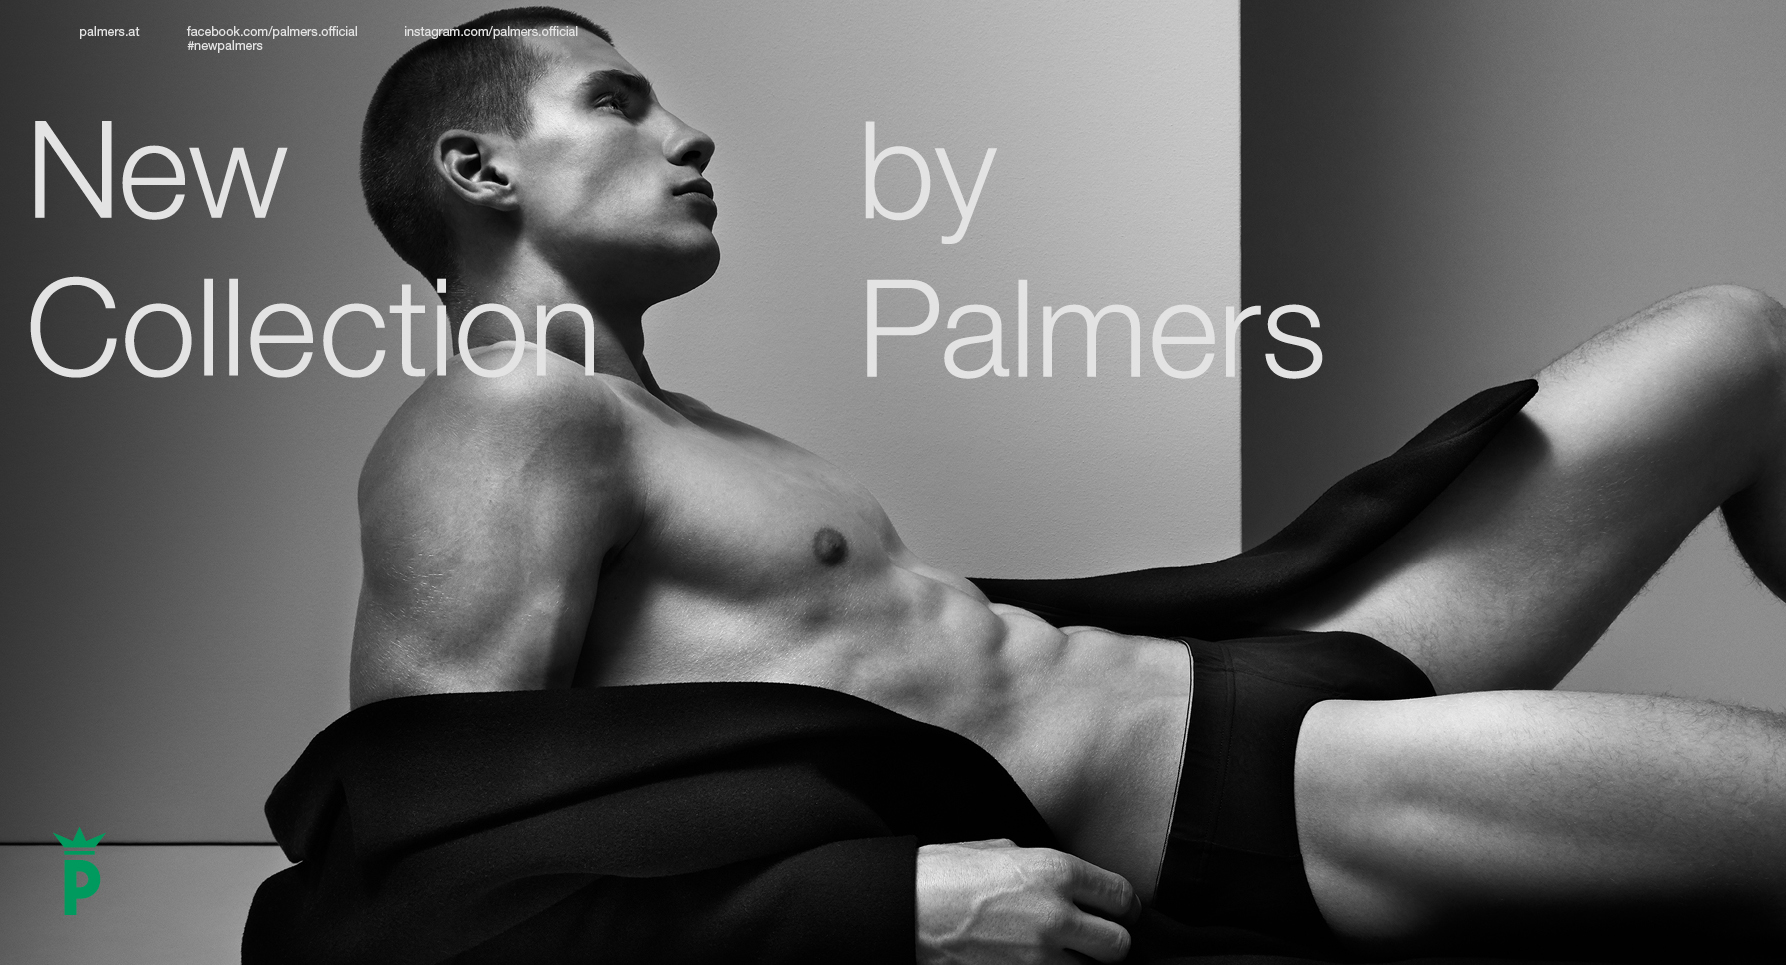 The New (Basic) Collection <br />
by Palmers 